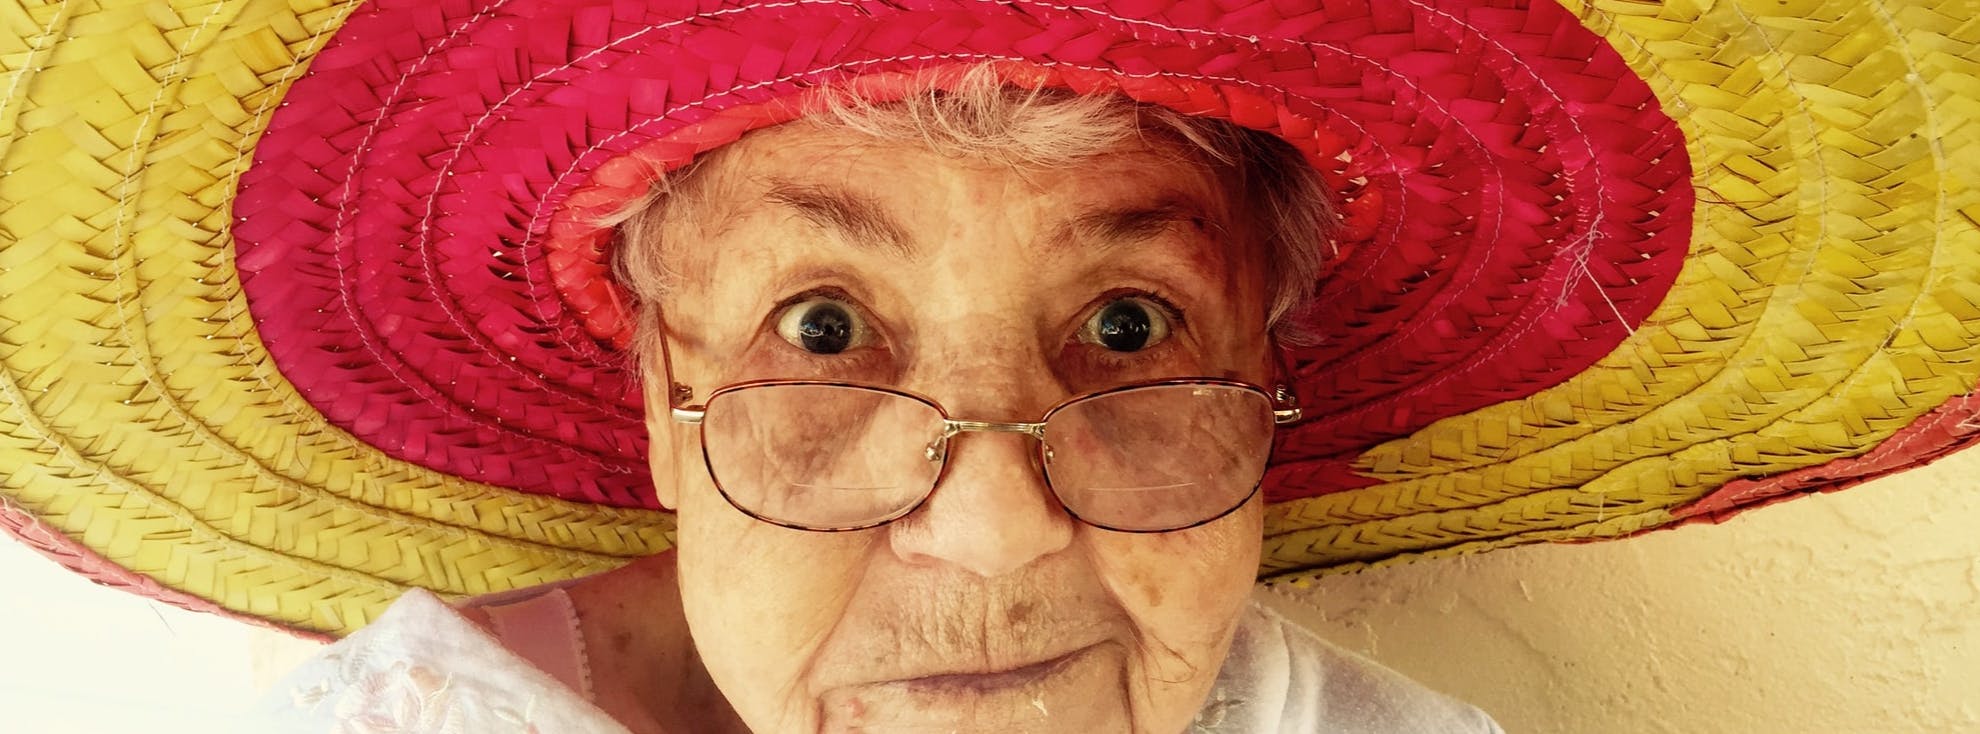 Elderly lady looking directly at the camera wearing a red and yellow sombrero hat.